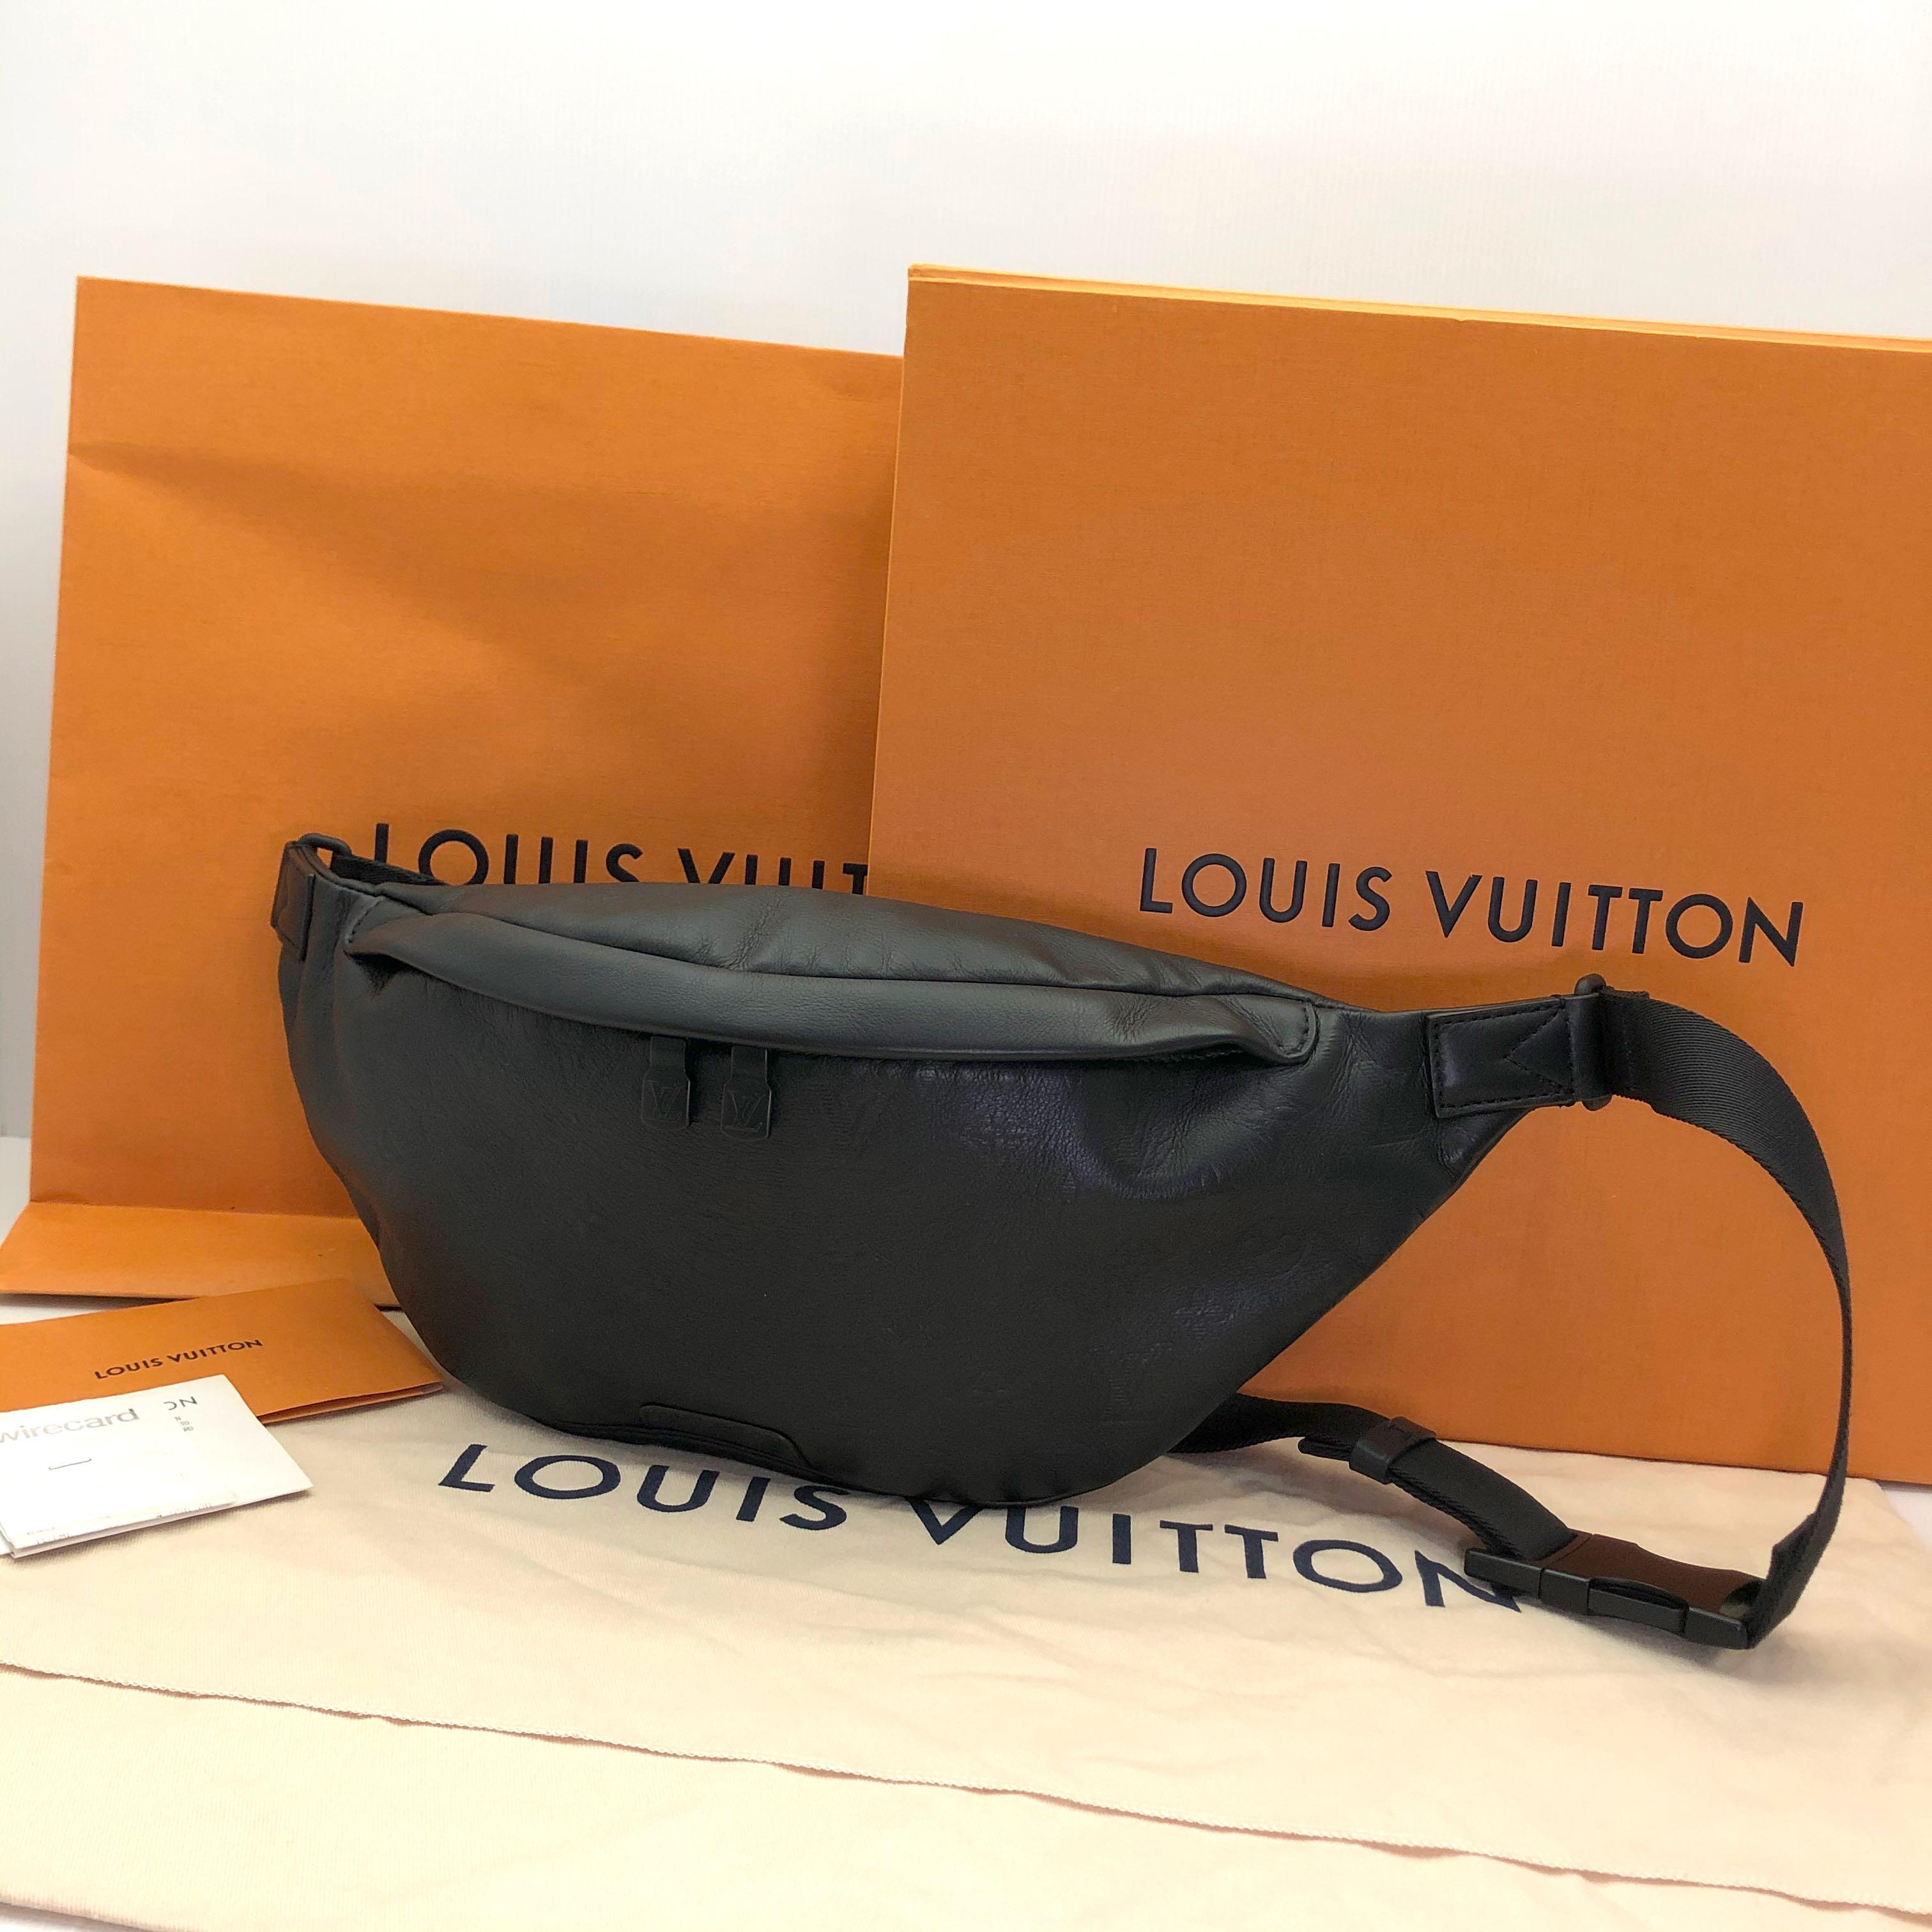 Louis Vuitton, Bags, Louis Vuitton Bum Bag Discovery Men With Packaging  And Tags